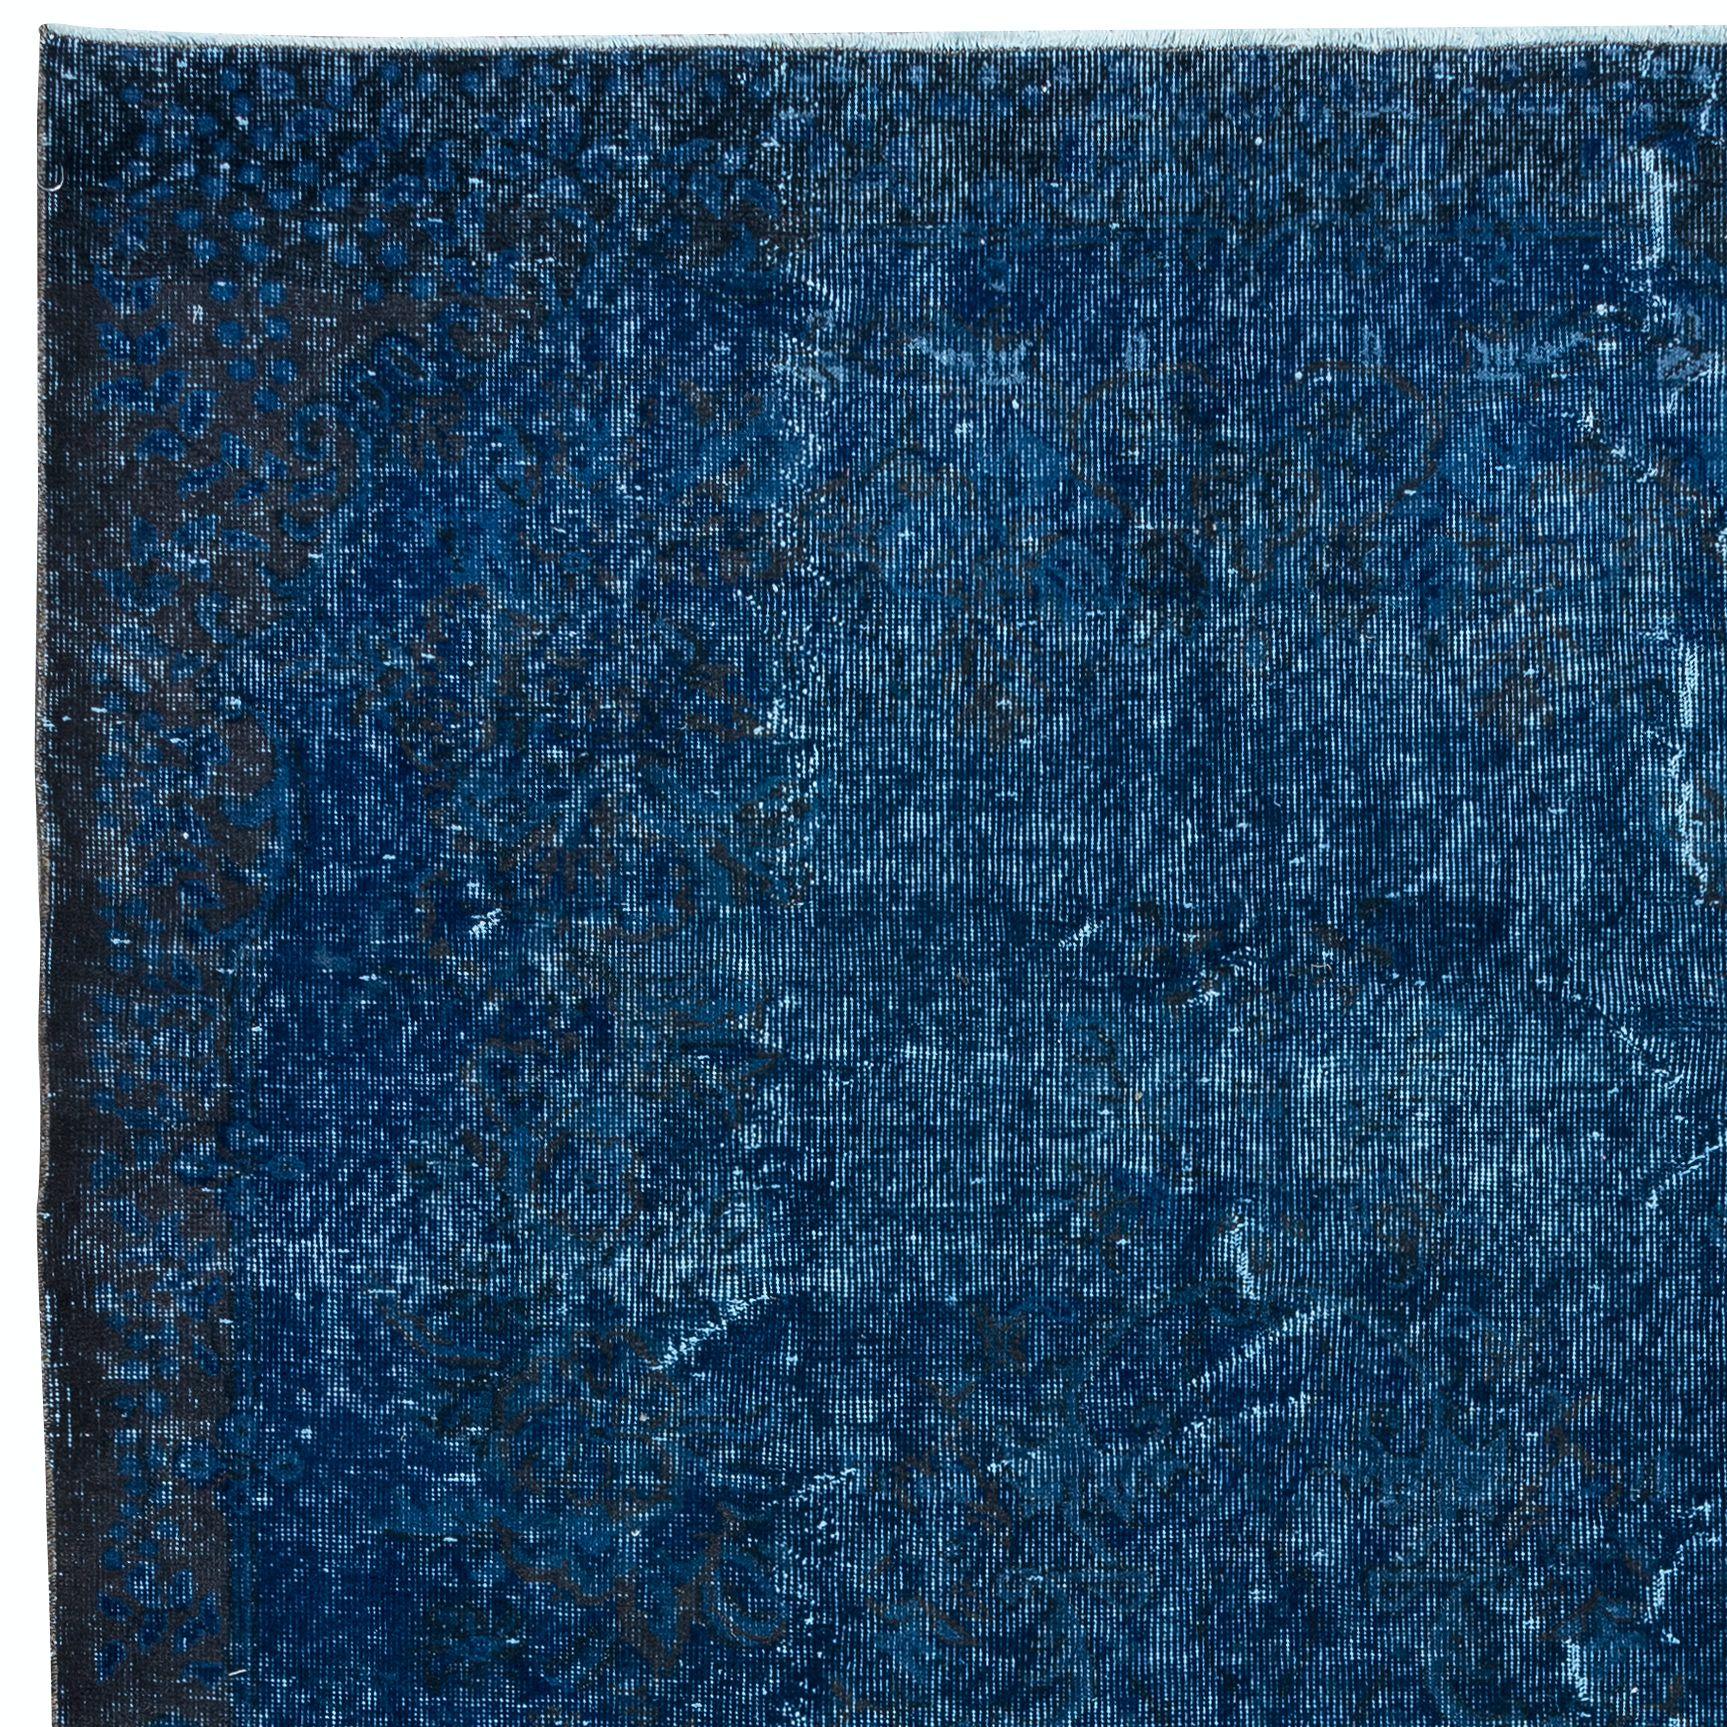 Hand-Knotted 6x9 Ft Modern Turkish Area Rug in Indigo Blue, Decorative Handmade Wool Carpet For Sale